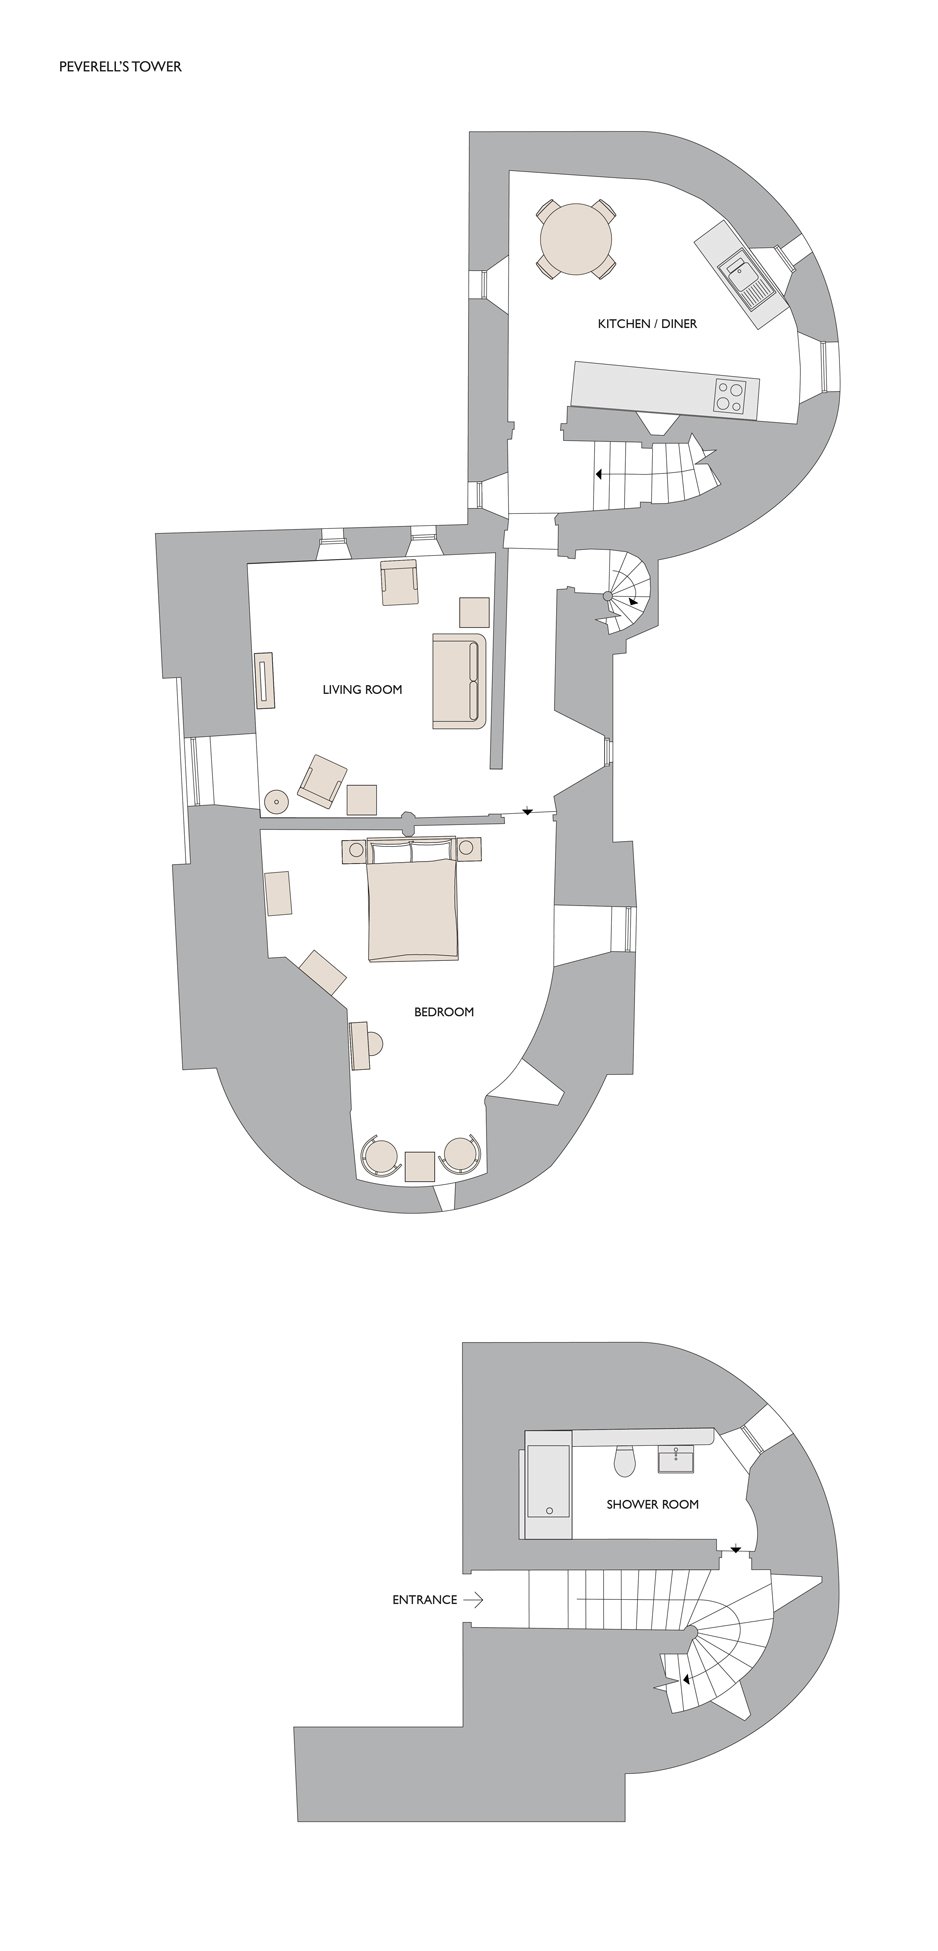 Layout & Facilities at Peverells Tower, Dover Castle